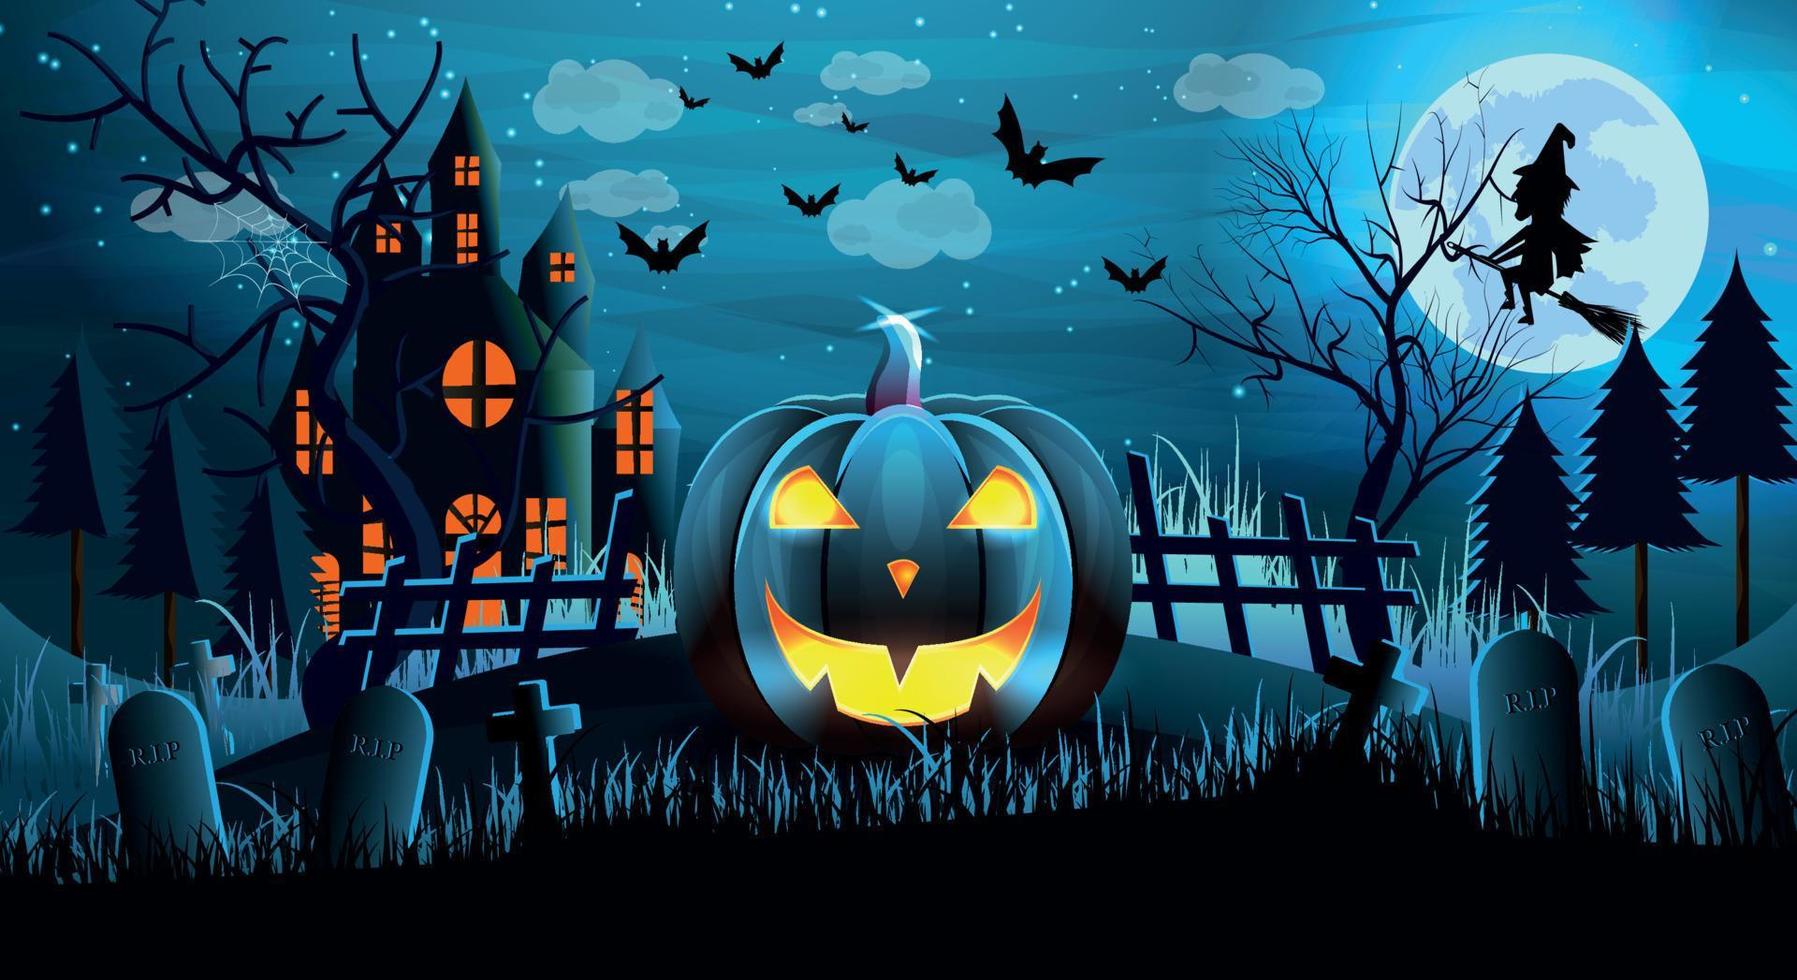 Halloween colorful background design with pumpkin vector